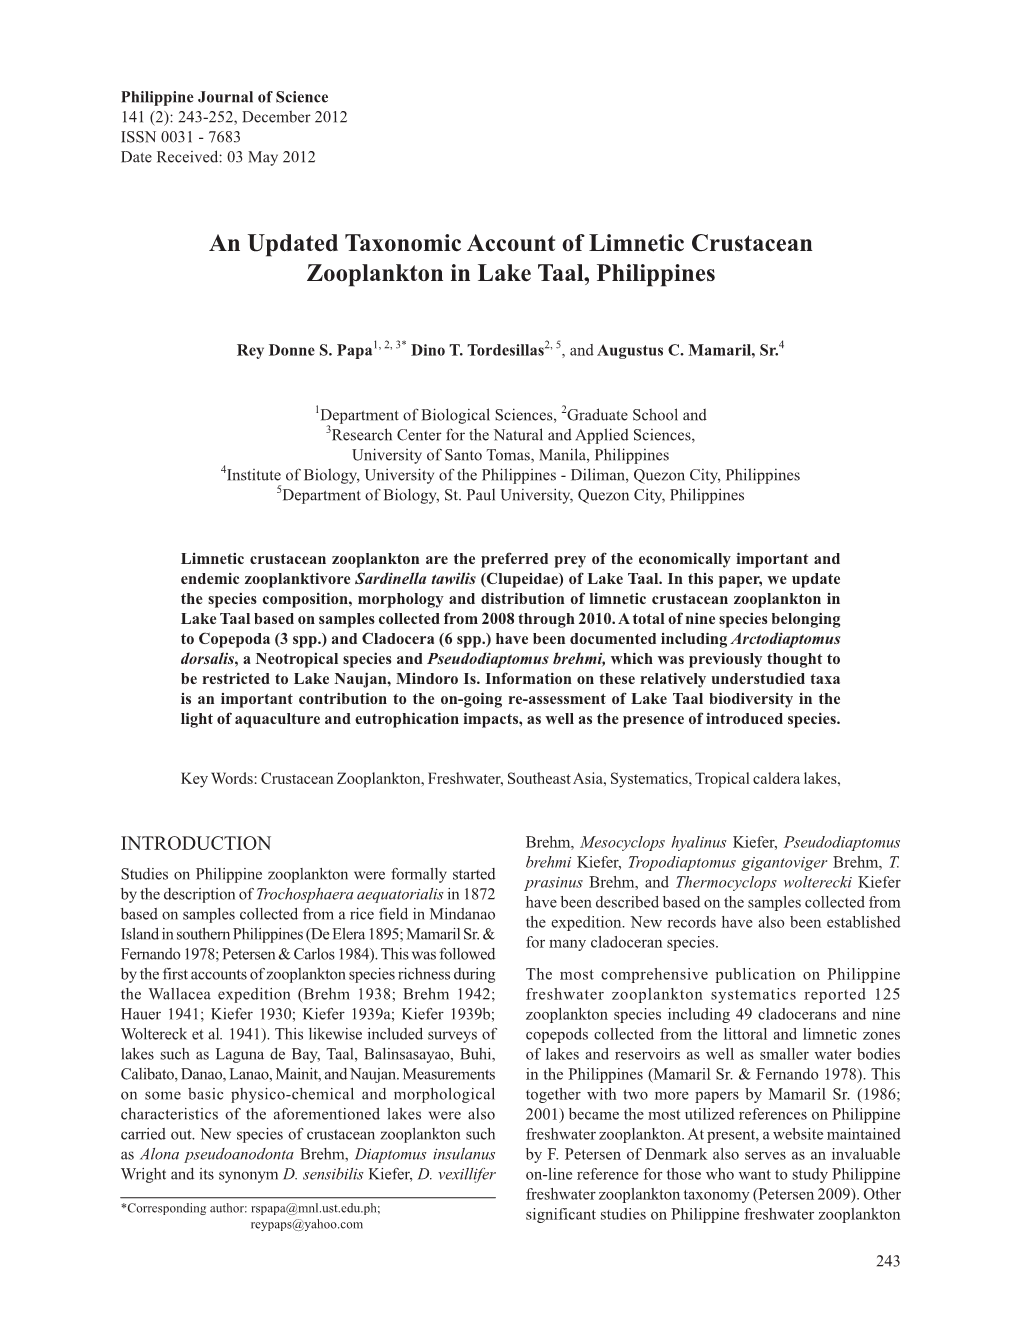 An Updated Taxonomic Account of Limnetic Crustacean Zooplankton in Lake Taal, Philippines